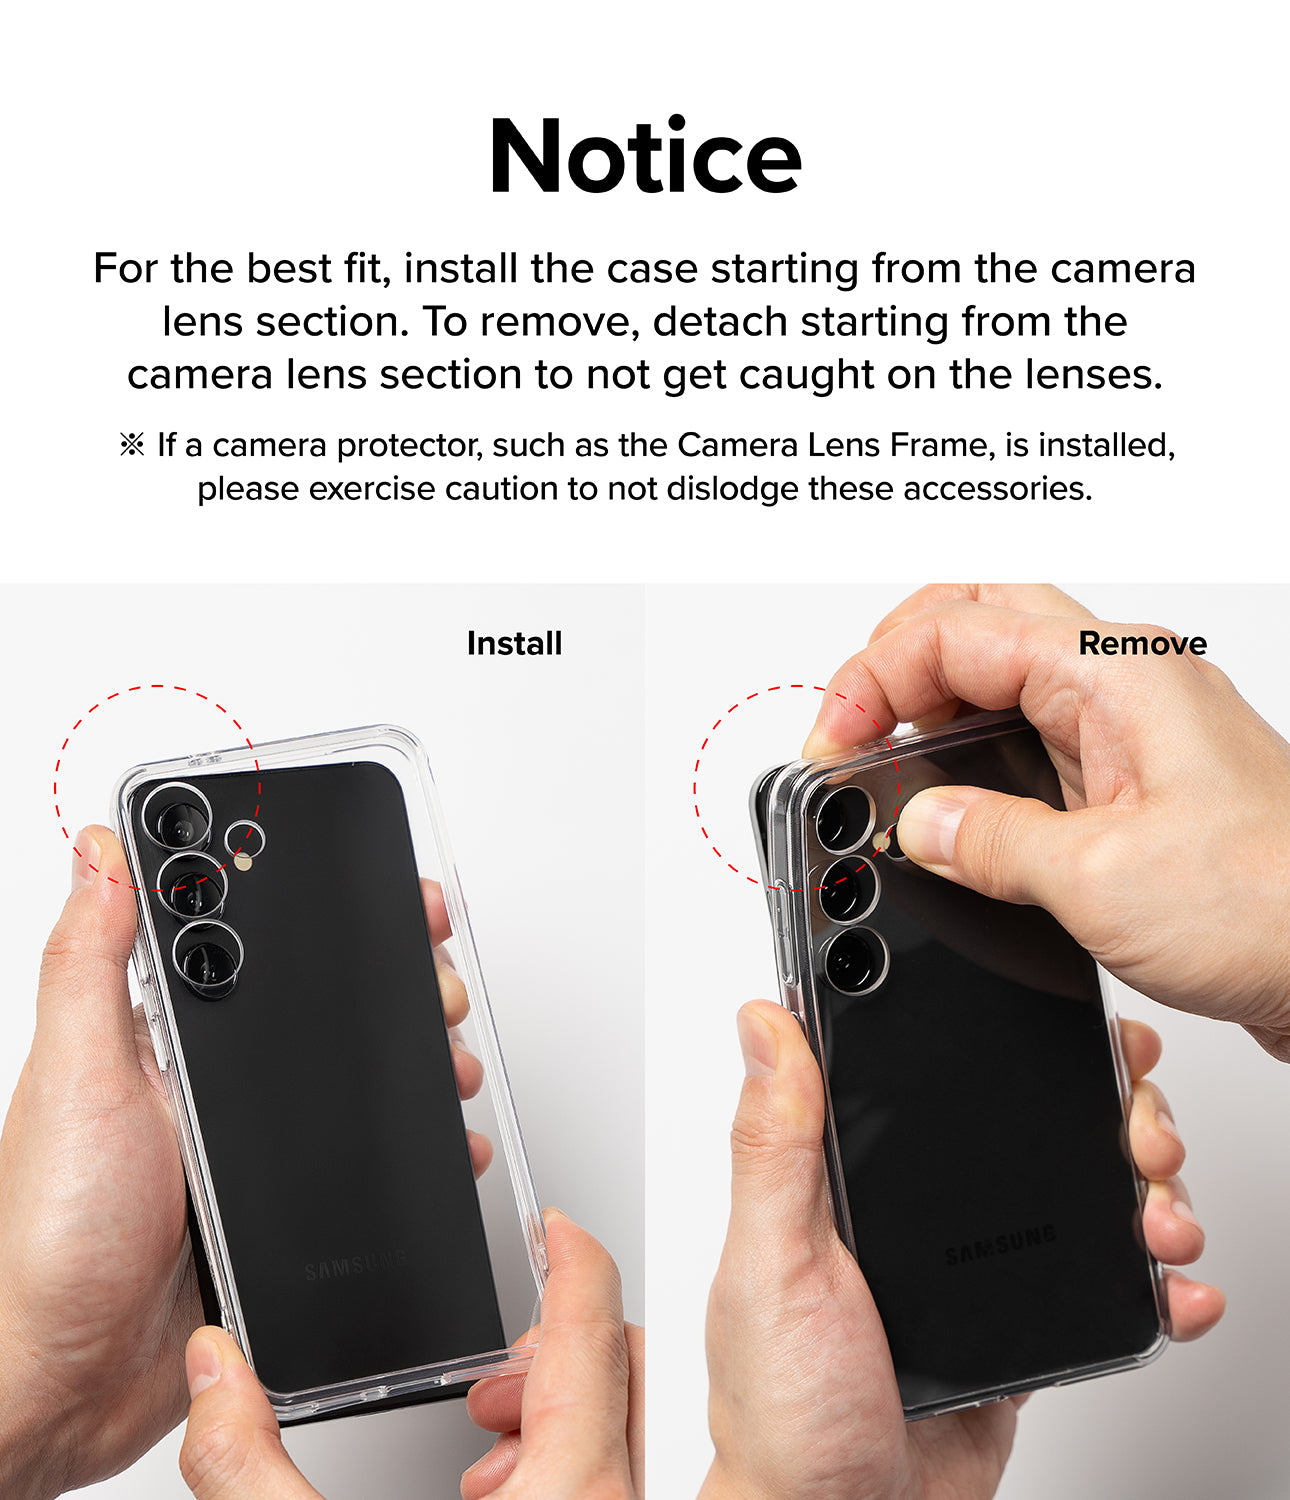 Galaxy A55 Case | Fusion-X - Notice. For the best fit, install the case starting from the camera lens section. To remove, detach starting fro mthe camera lens section to not get caught on the lenses.